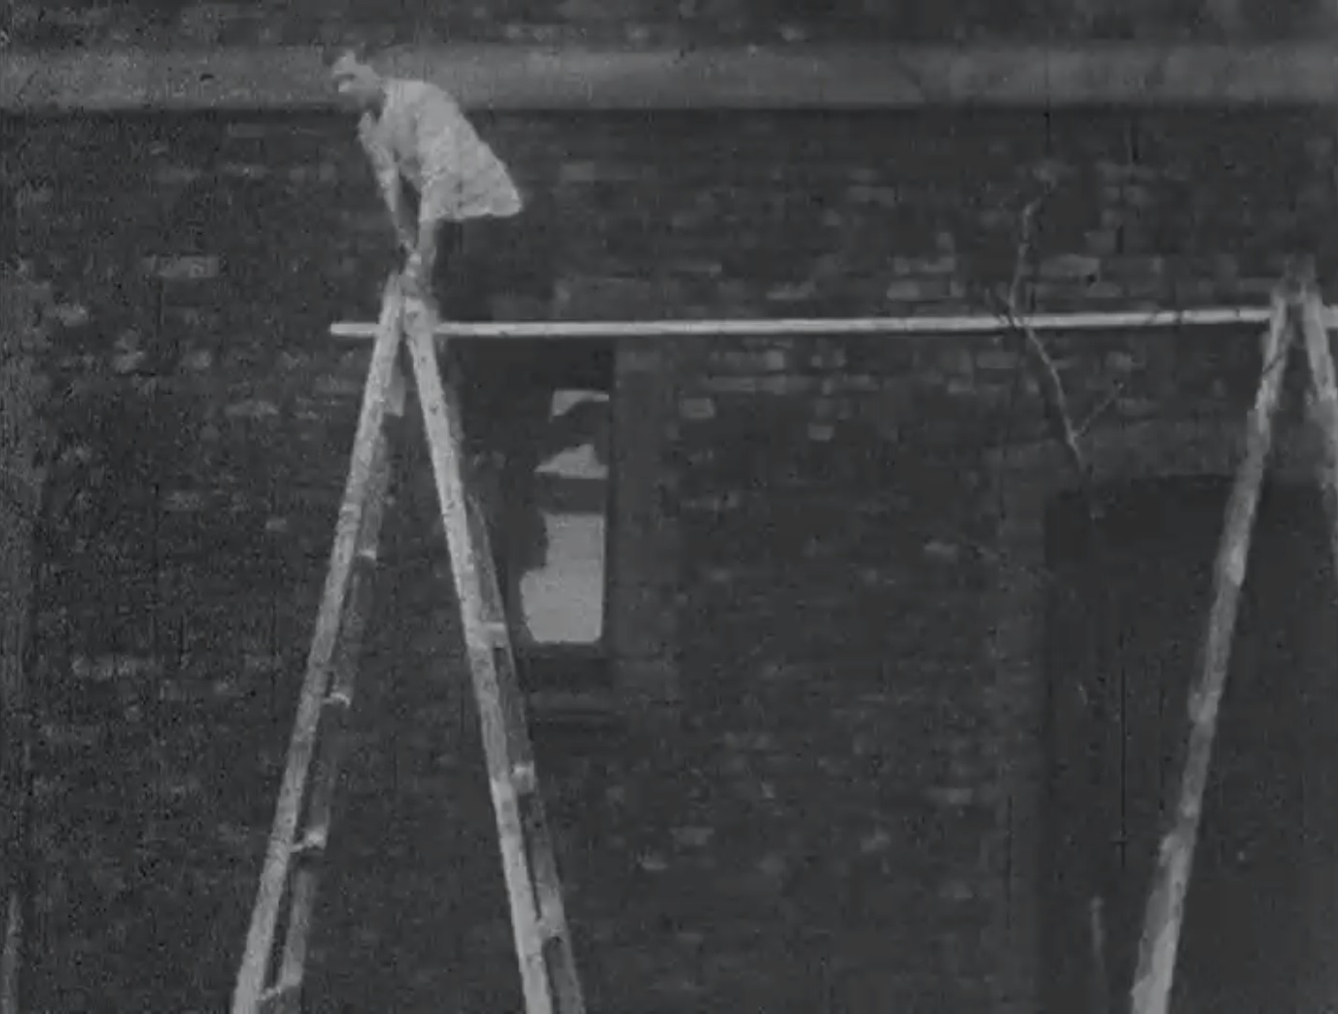 Black and white still showing a man with his hand bandaged up tightly, perched at the top of a ladder about to climb onto a plank balanced between his ladder and another.